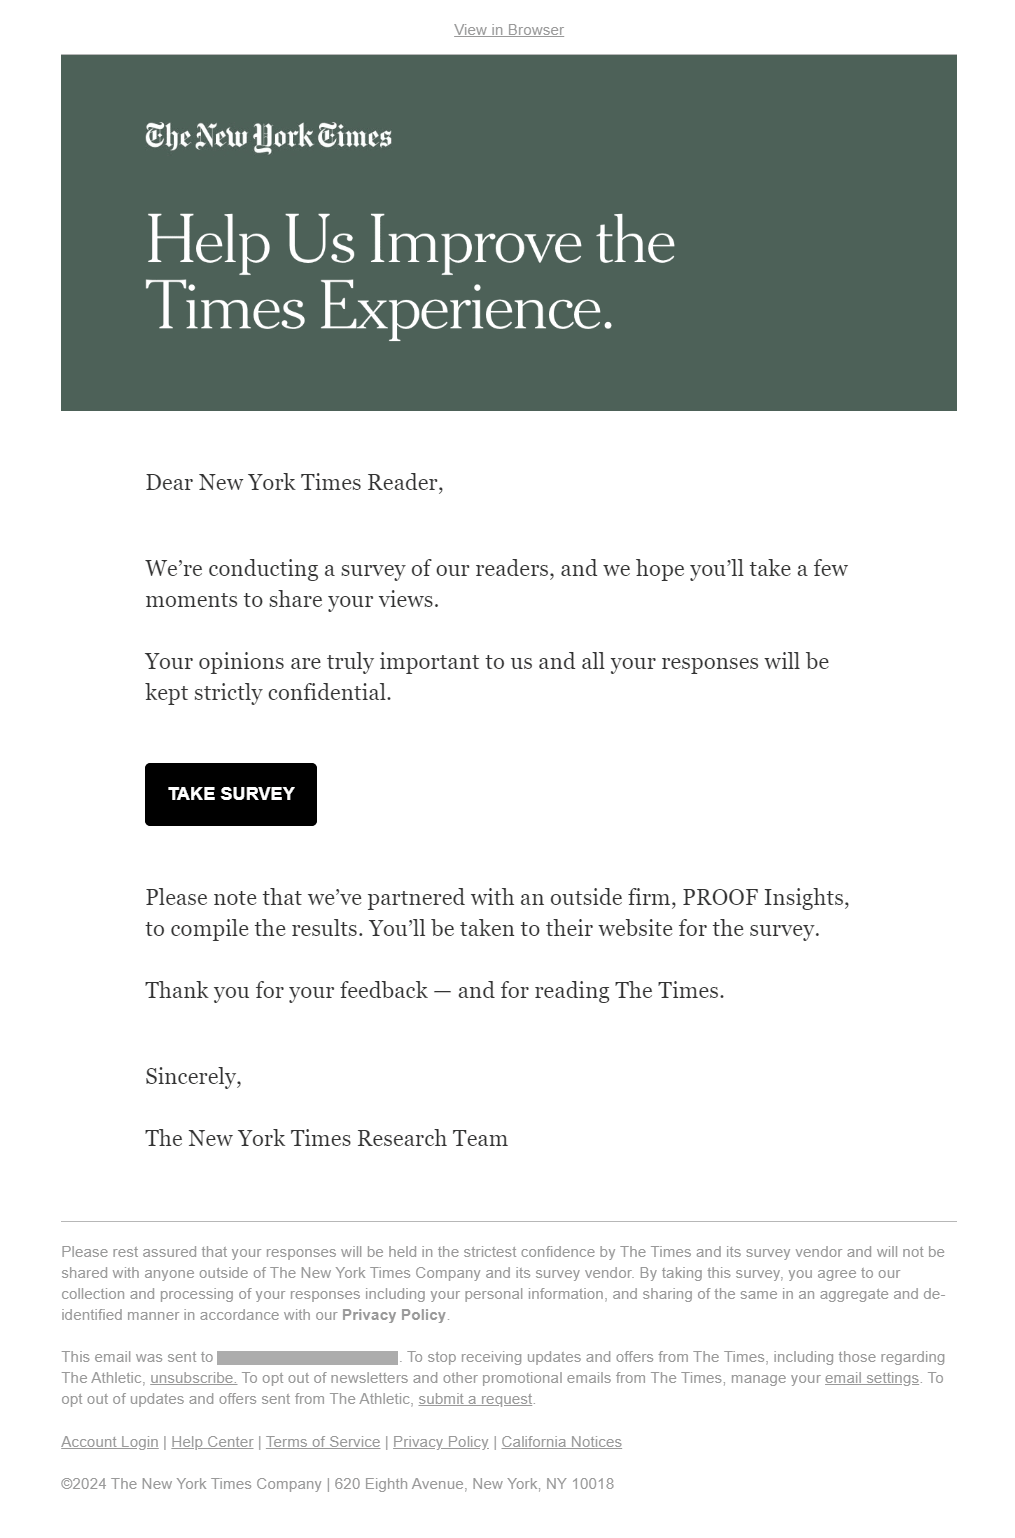 survey campaign by the new york times